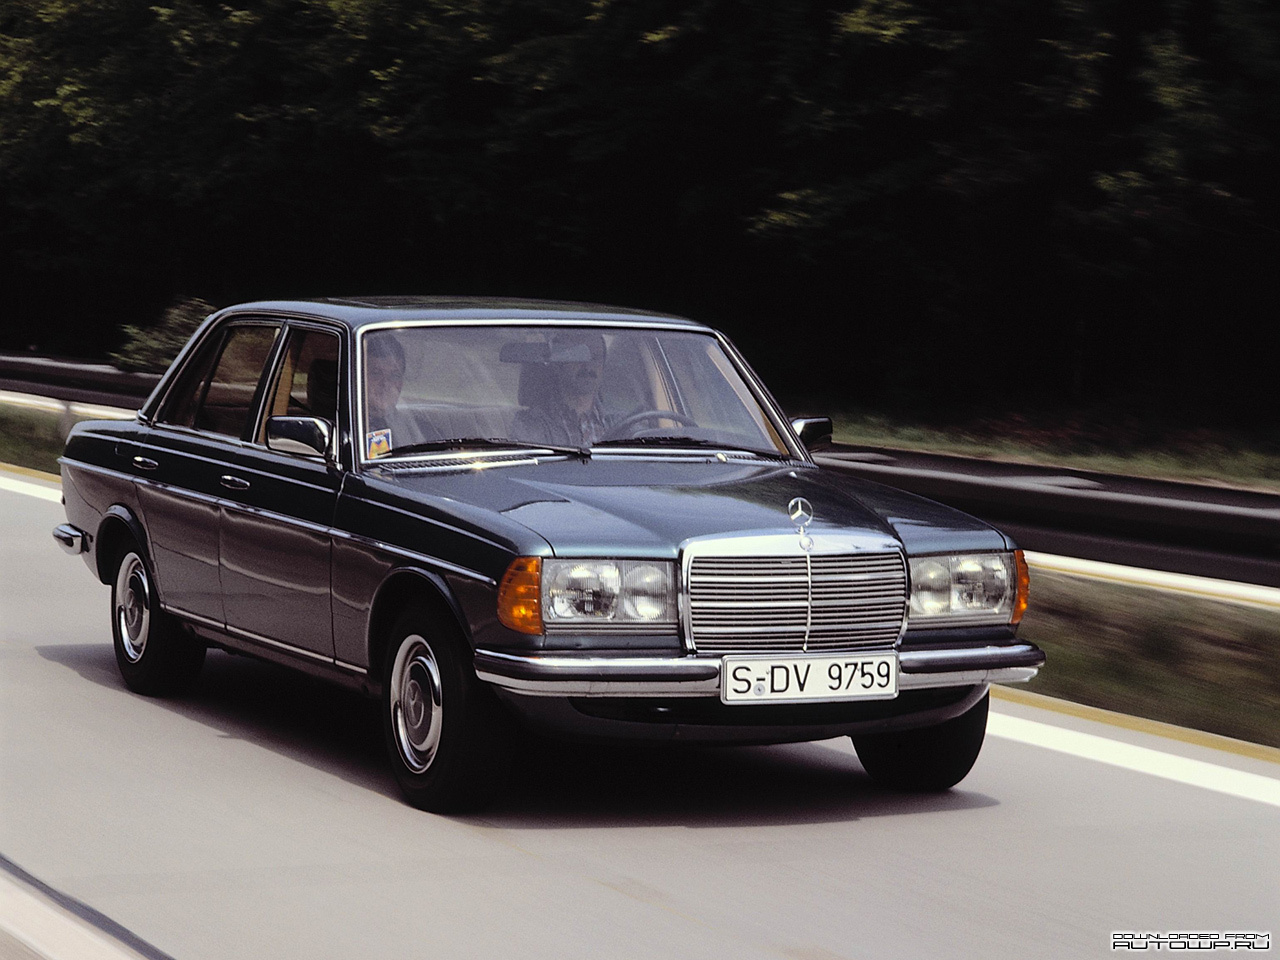 You can vote for this MercedesBenz EClass W123 photo